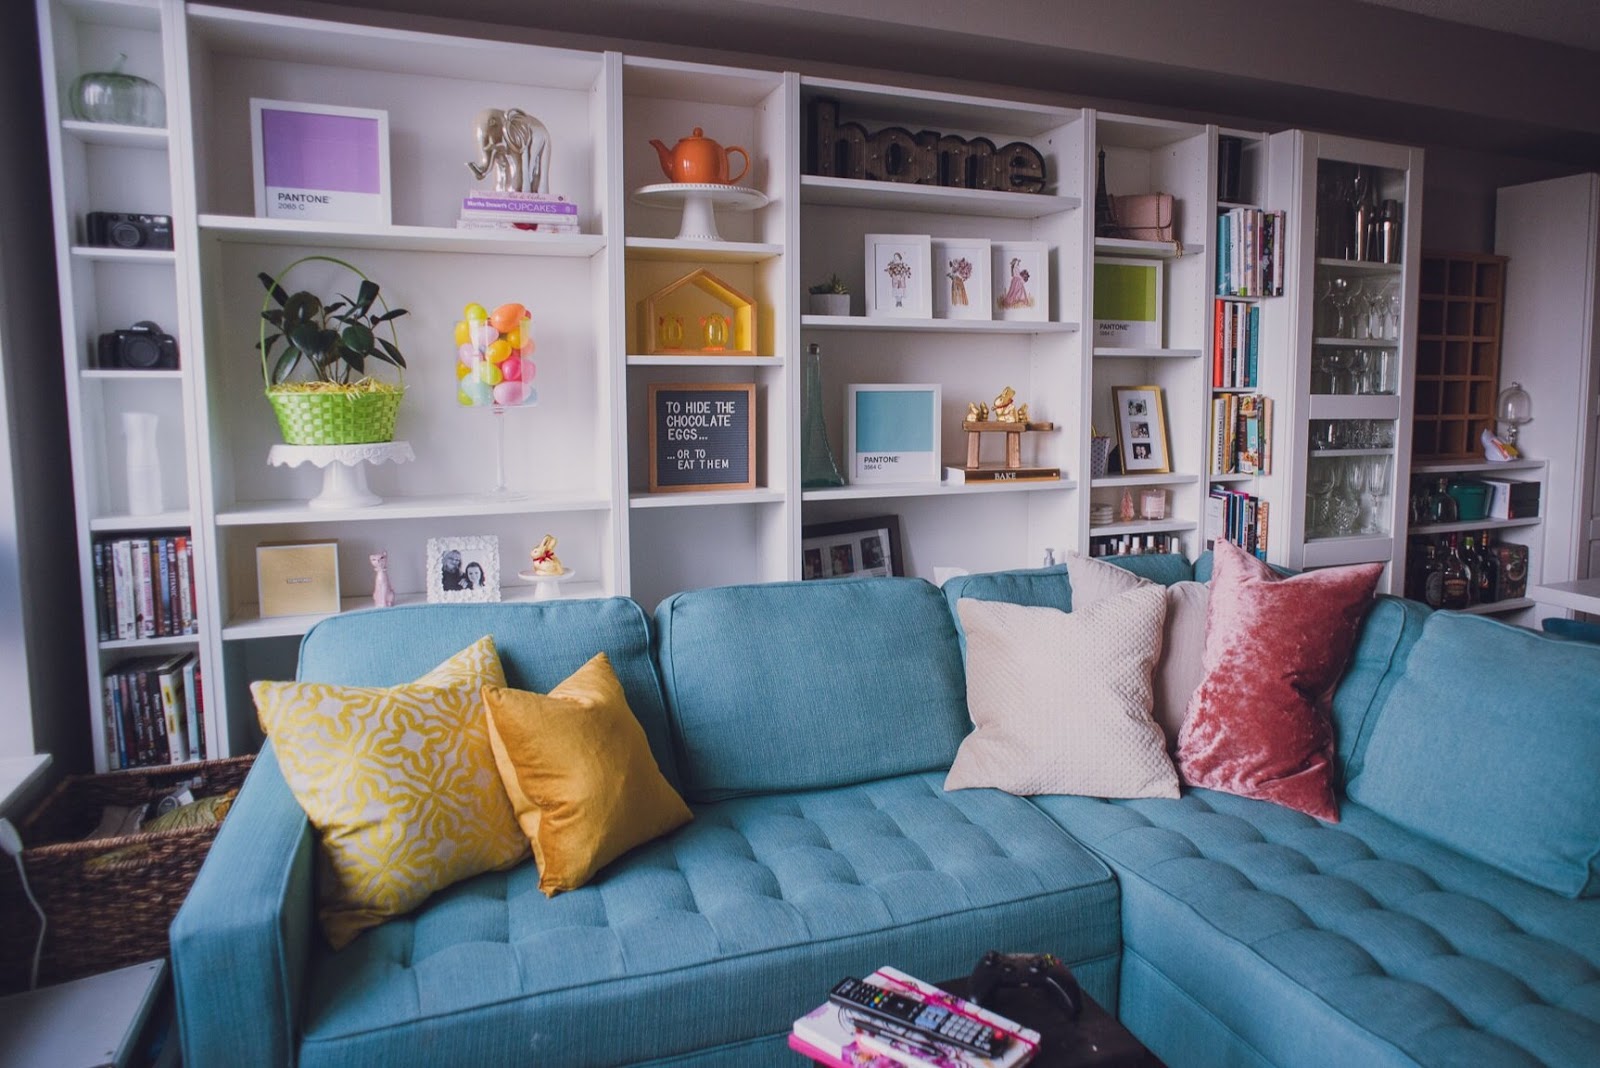 lily-muffins-blue-couch-yellow-cushions-easter-living-room